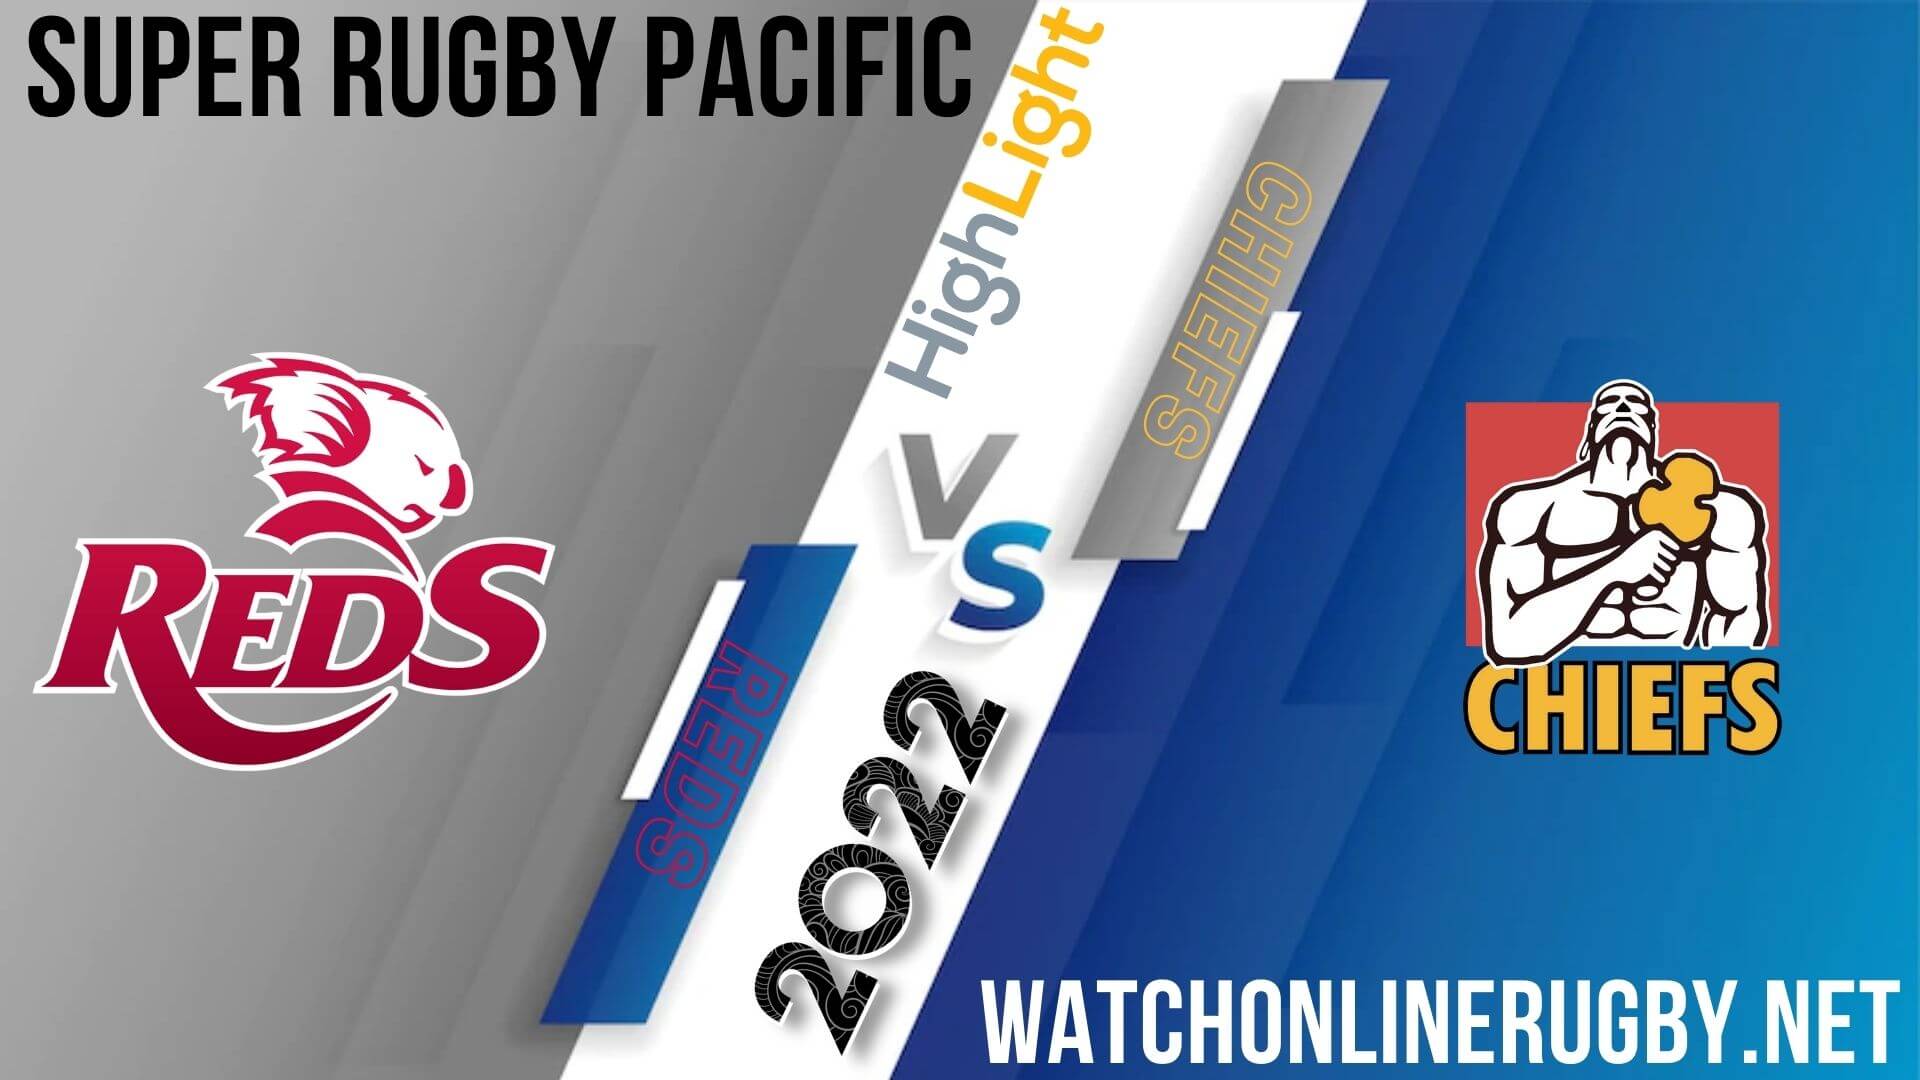 Reds Vs Chiefs Super Rugby Pacific 2022 RD 11